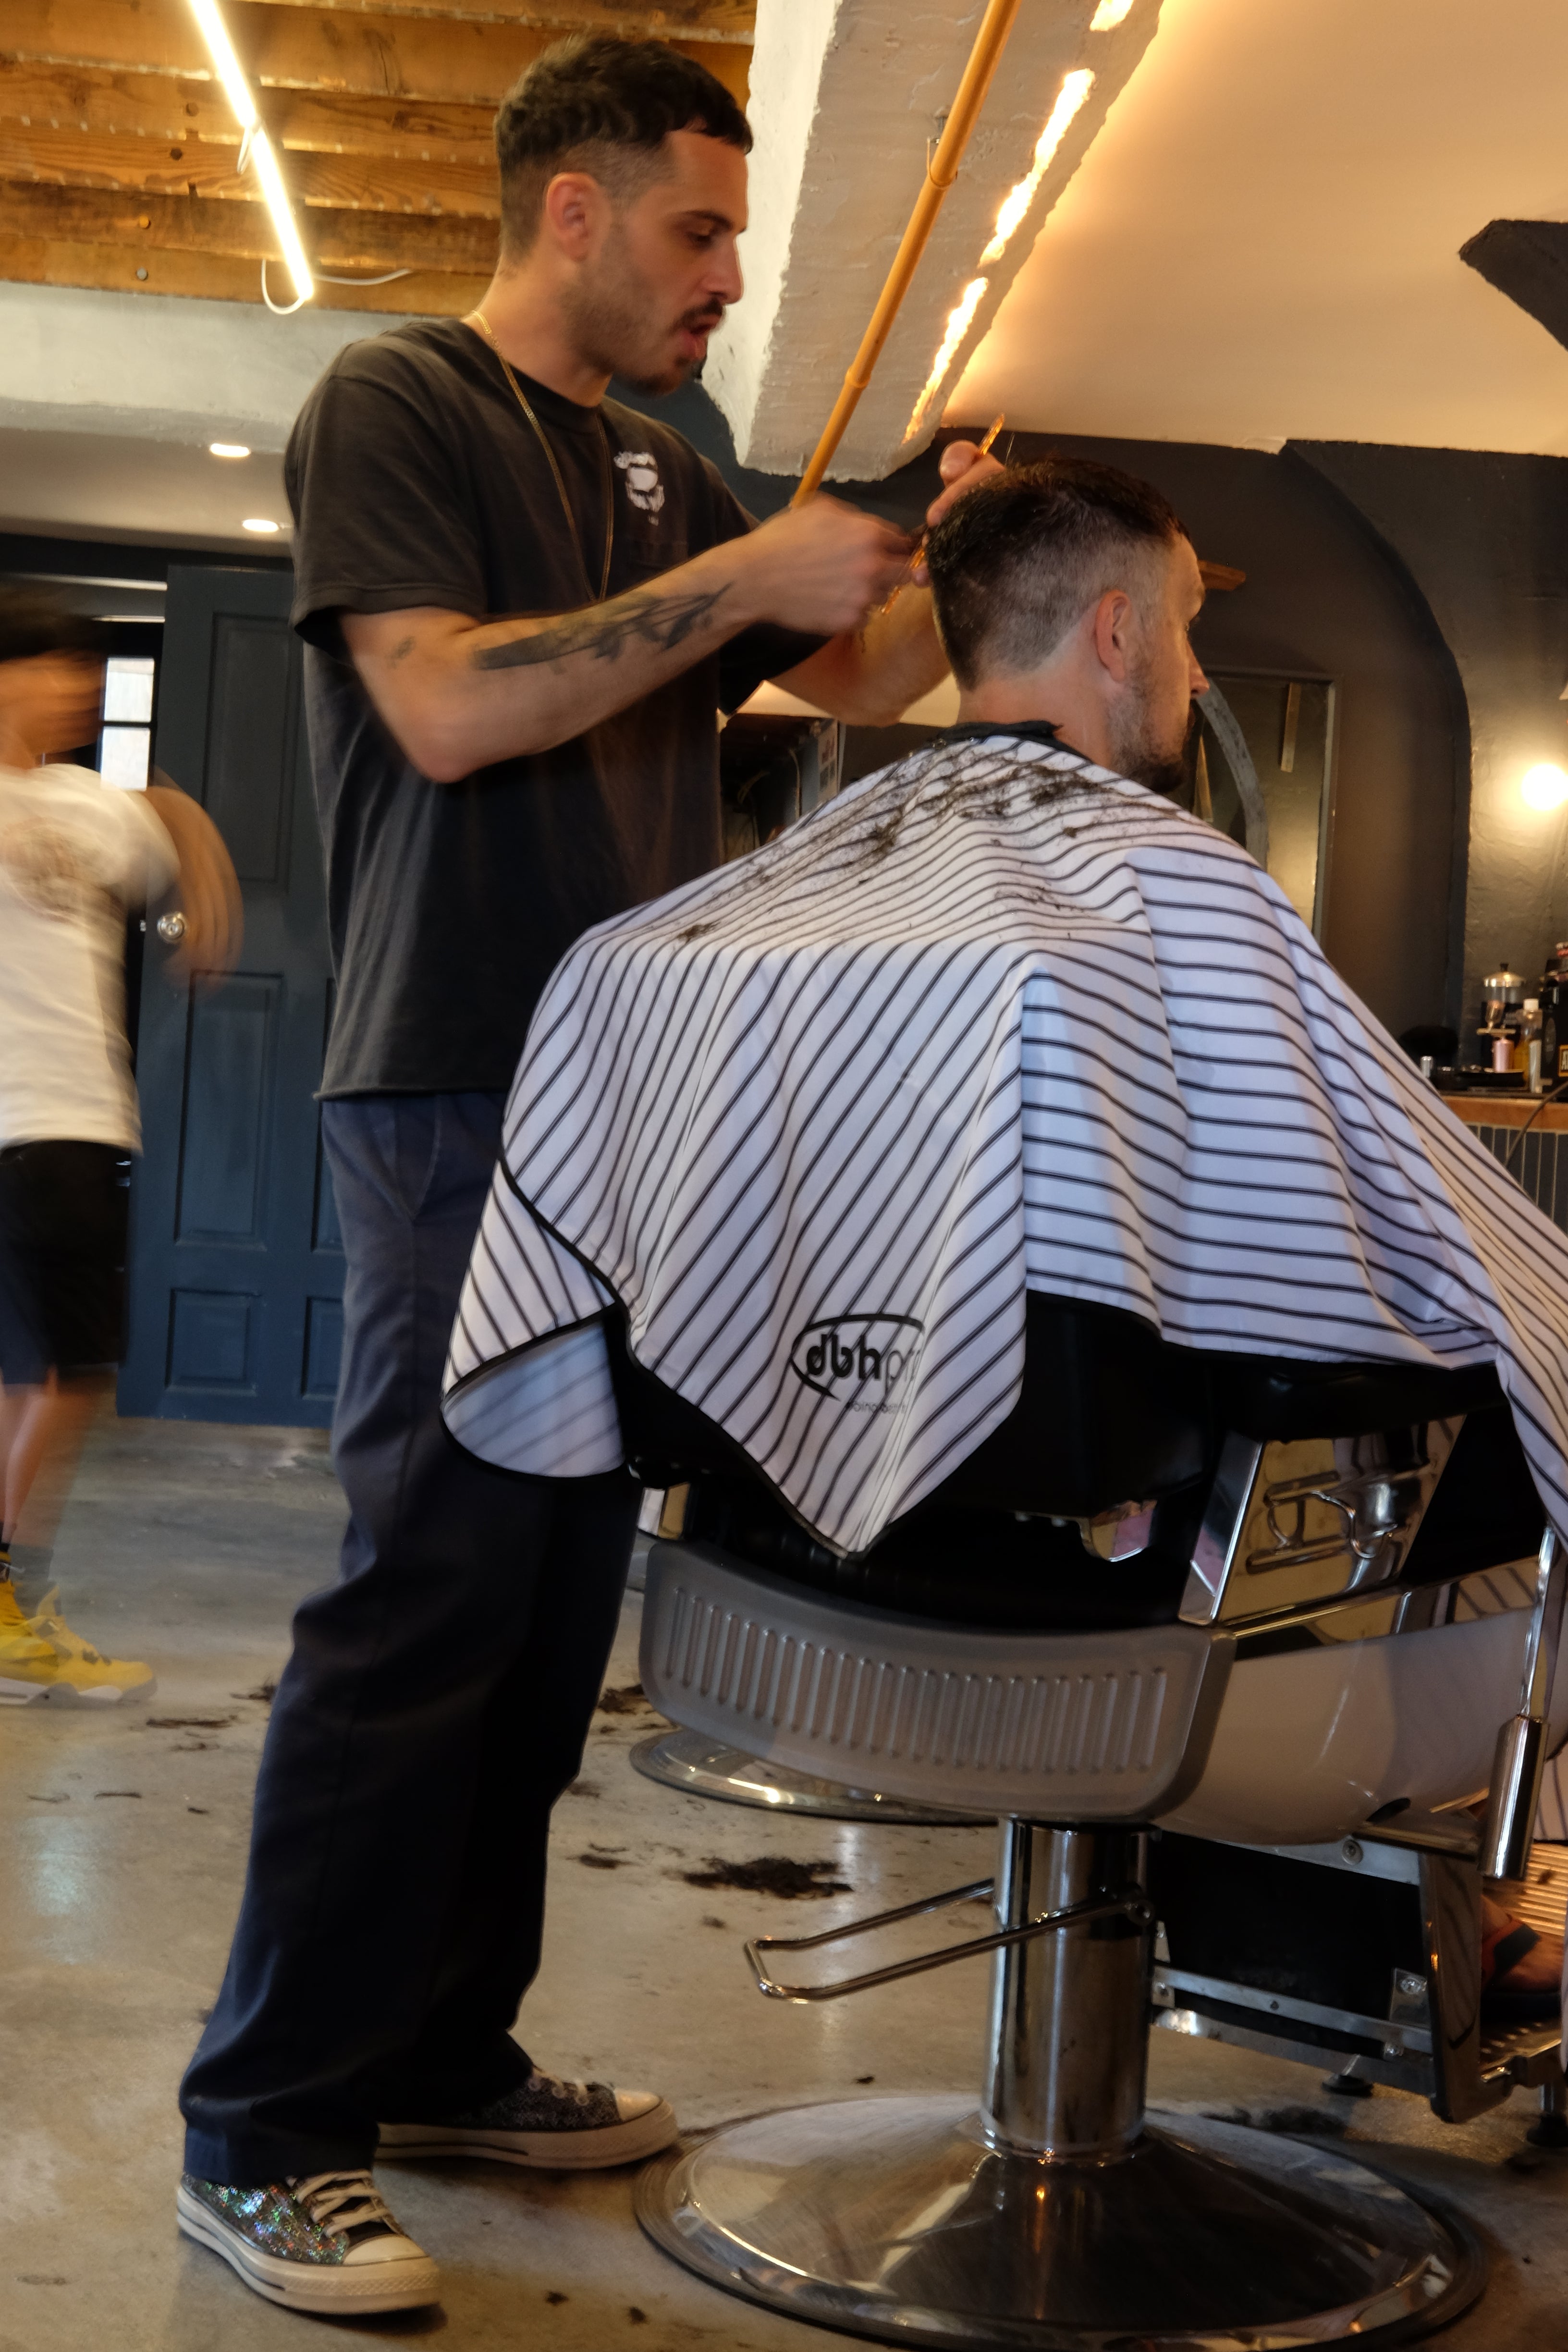 The Almeda Club is Shaping Hair, Surfboards, and Community in 